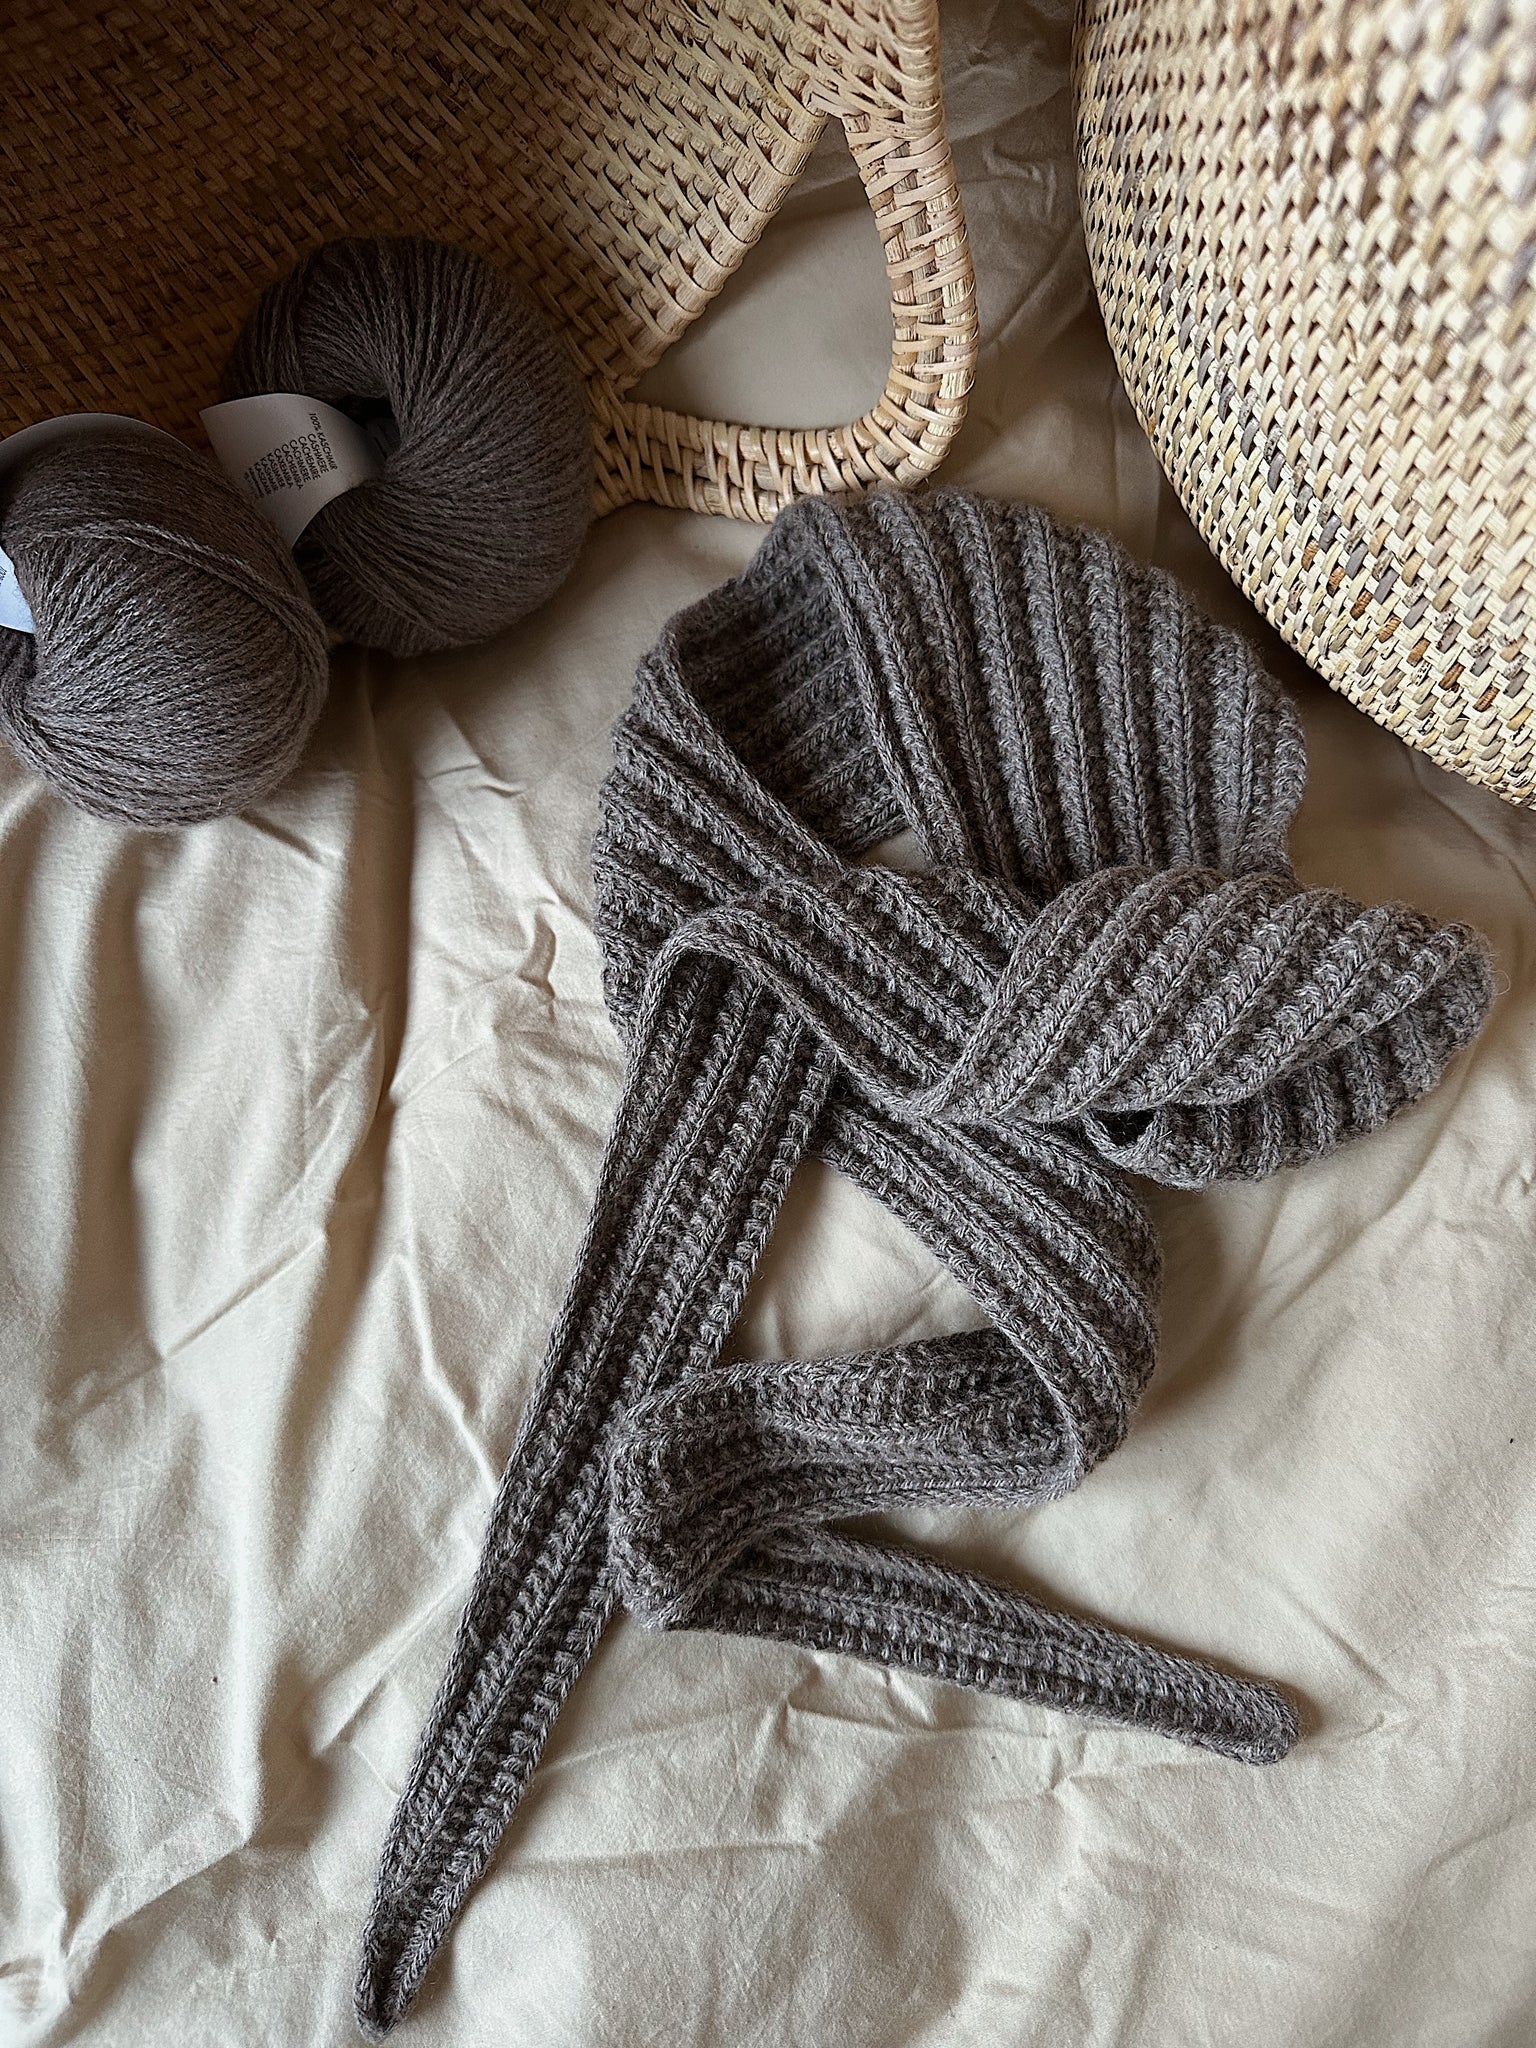 Scarf No. 3 - My Favourite Things Knitwear – Strickpaket